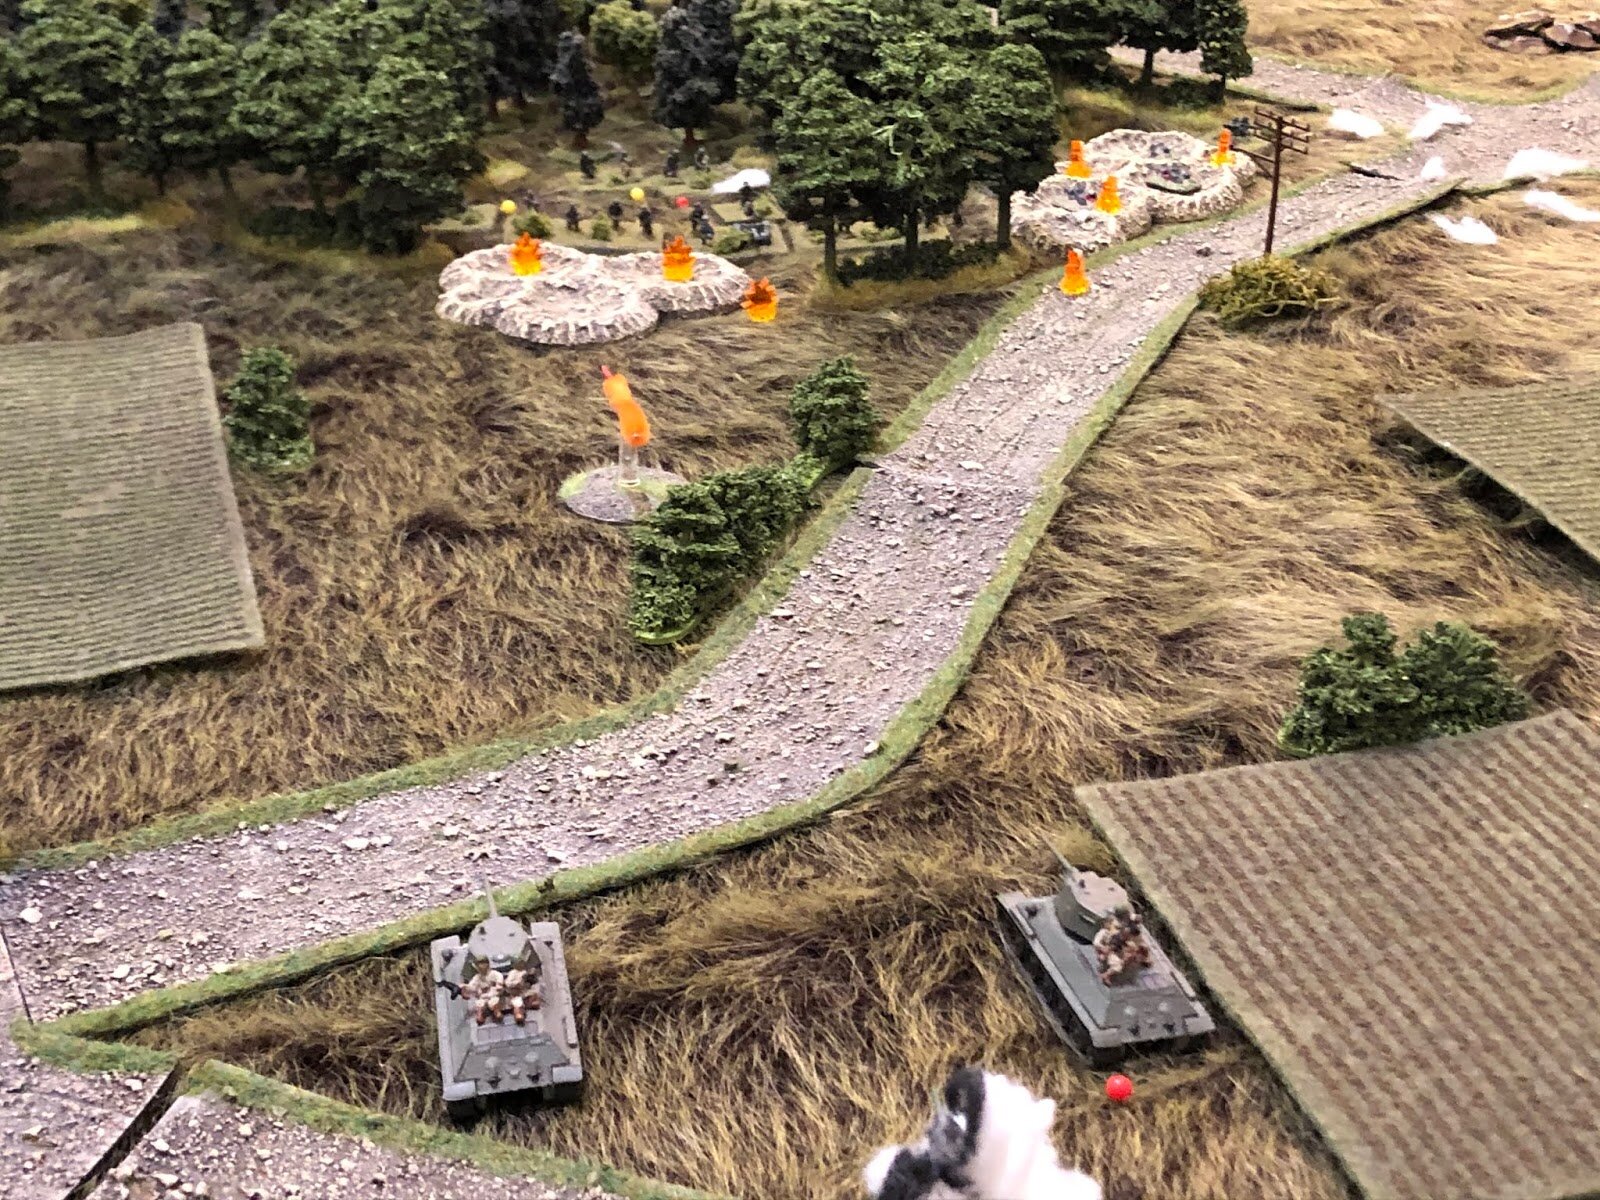  The two T-34s lay into the German defenders on the objective with their main guns.  